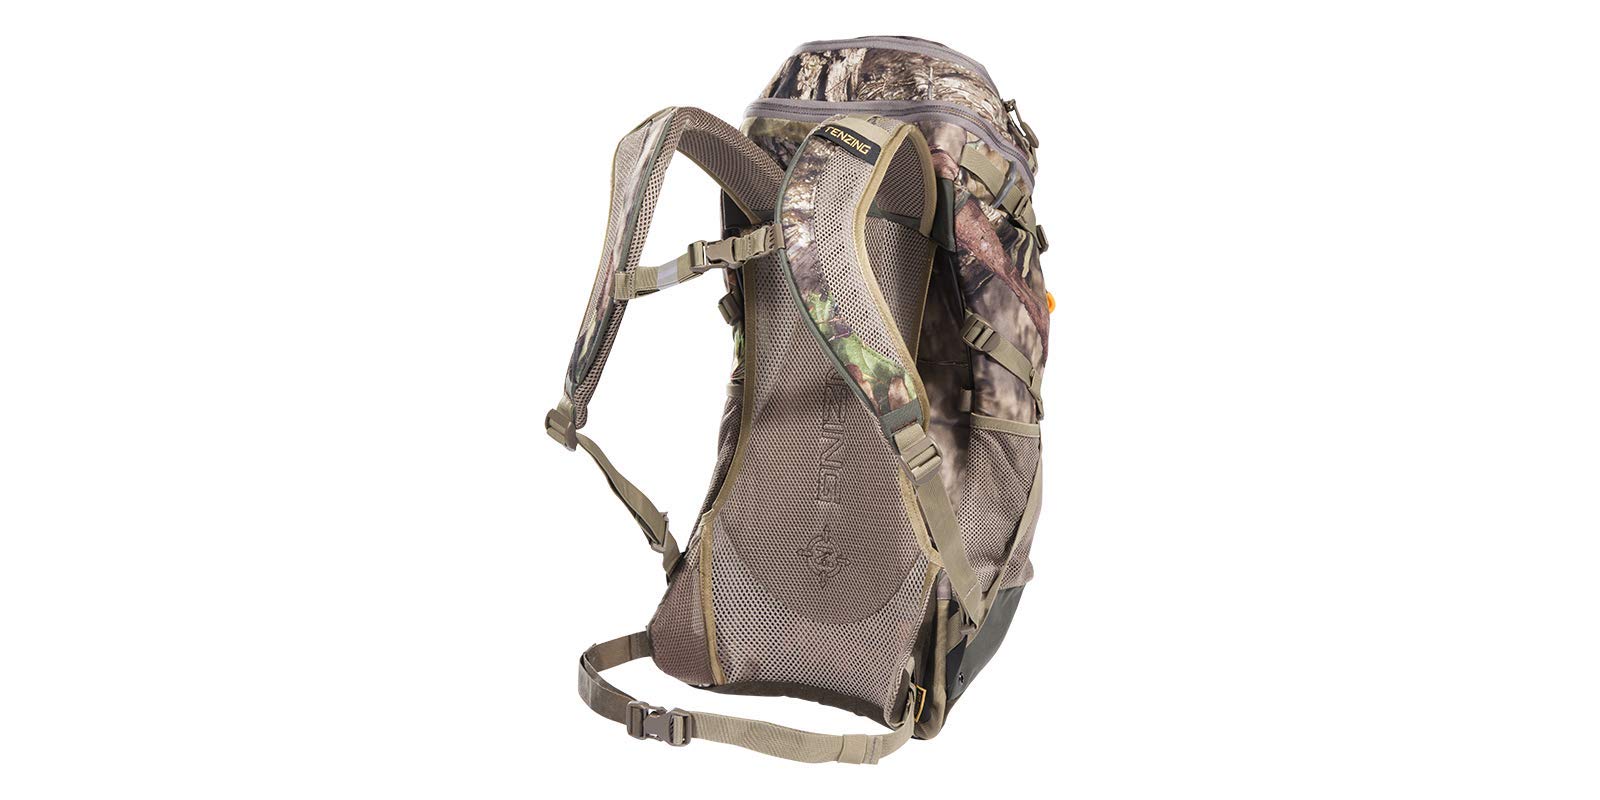 TENZING TX Series Hunting Packs| Premium Bow and Rifle Hunting Packs Featuring Mossy Oak Break-Up Country Camo | Available in Backpack and Waist Pack Styles